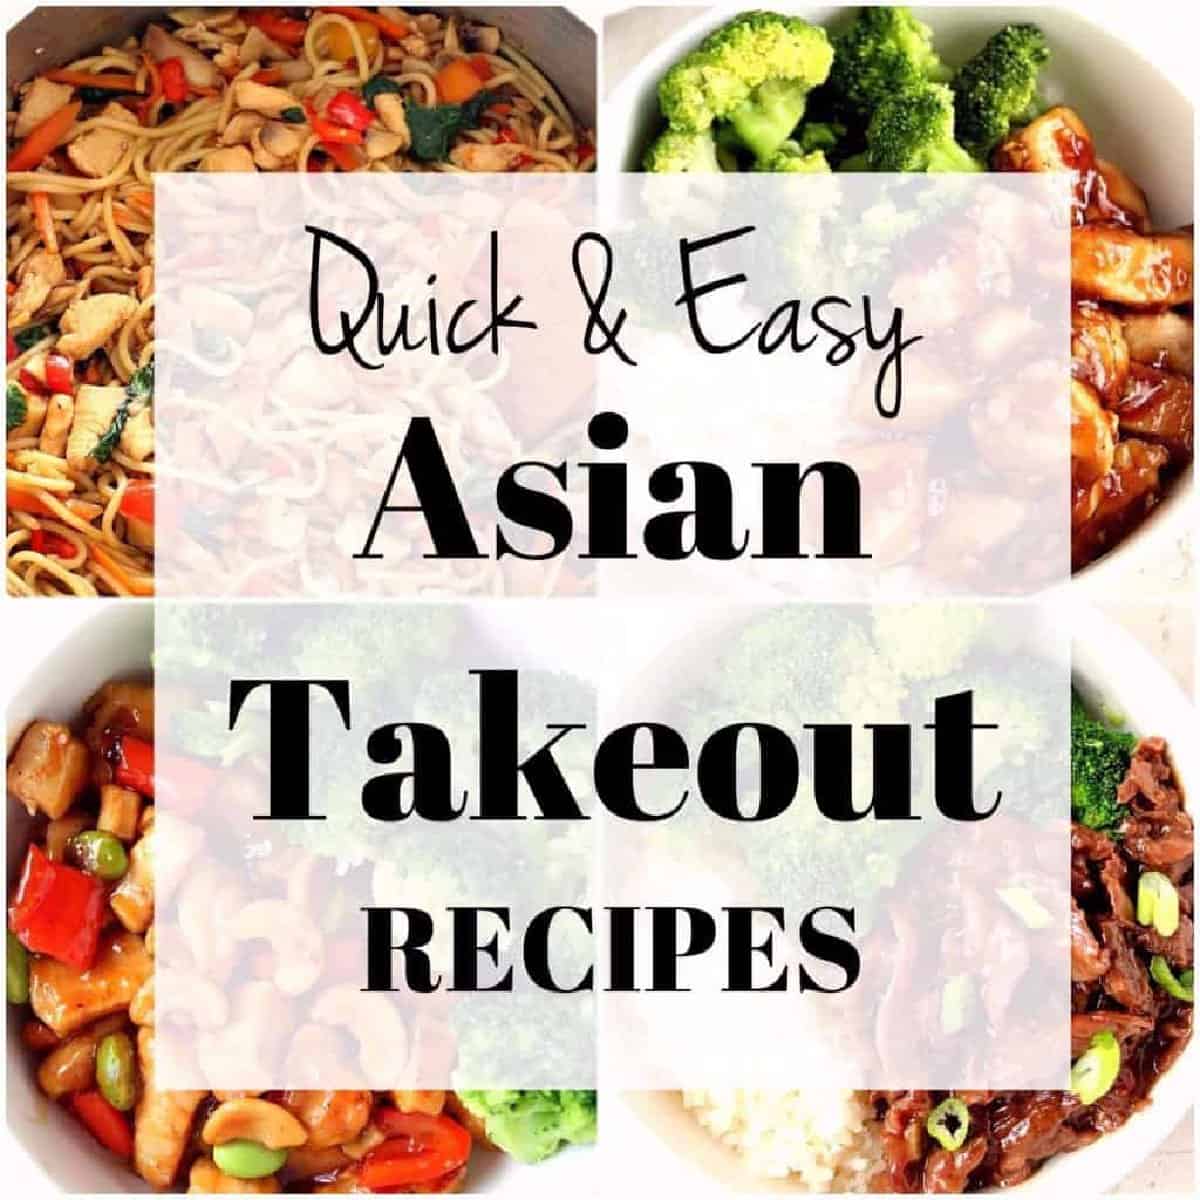 Collage of Asian recipes with text overlay that says Asian Takeout recipes.